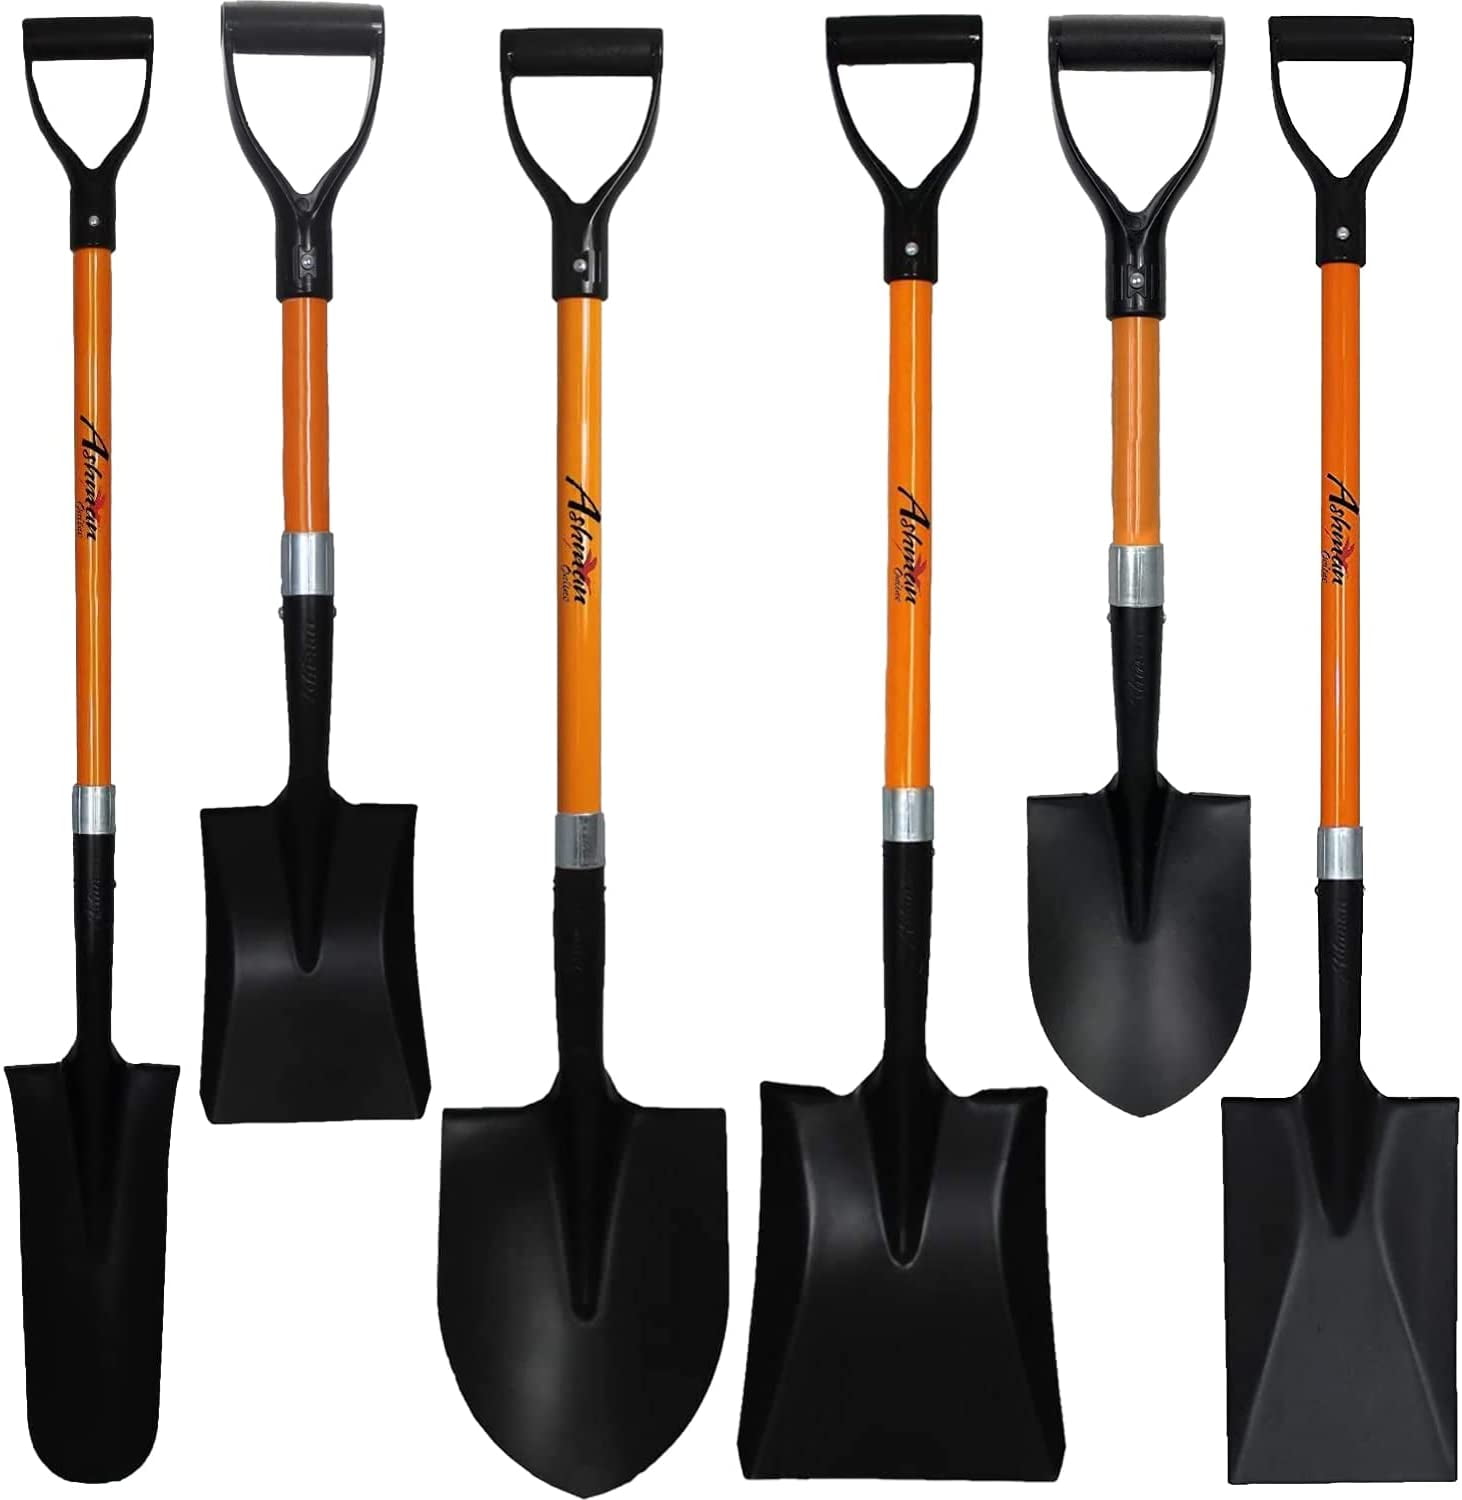 Material with Firm and Comfortable Durable Handle 2 Pack Ashman Square Shovel Sturdy Build and Easy to use Built to Last. 27 Inches in Length with D-Cup Handle Square Shovel 